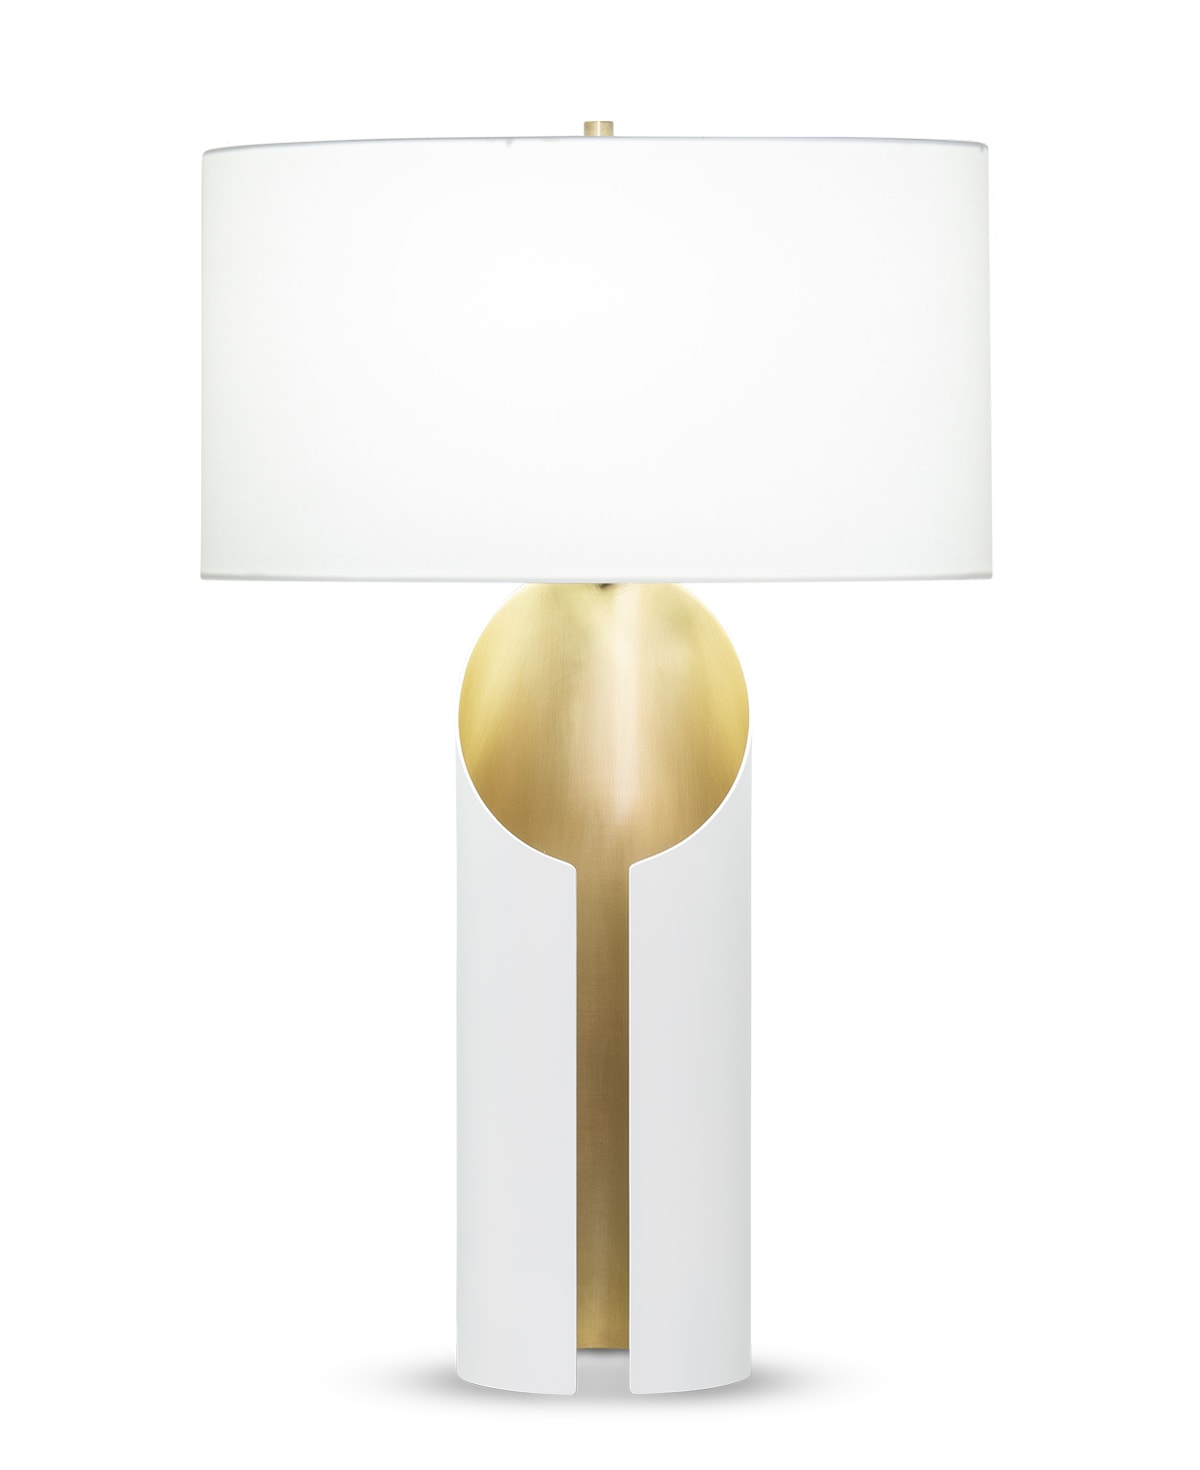 FlowDecor Lena Table Lamp in brass with antique brass & matte off-white finishes and off-white cotton oval shade (# 4482)